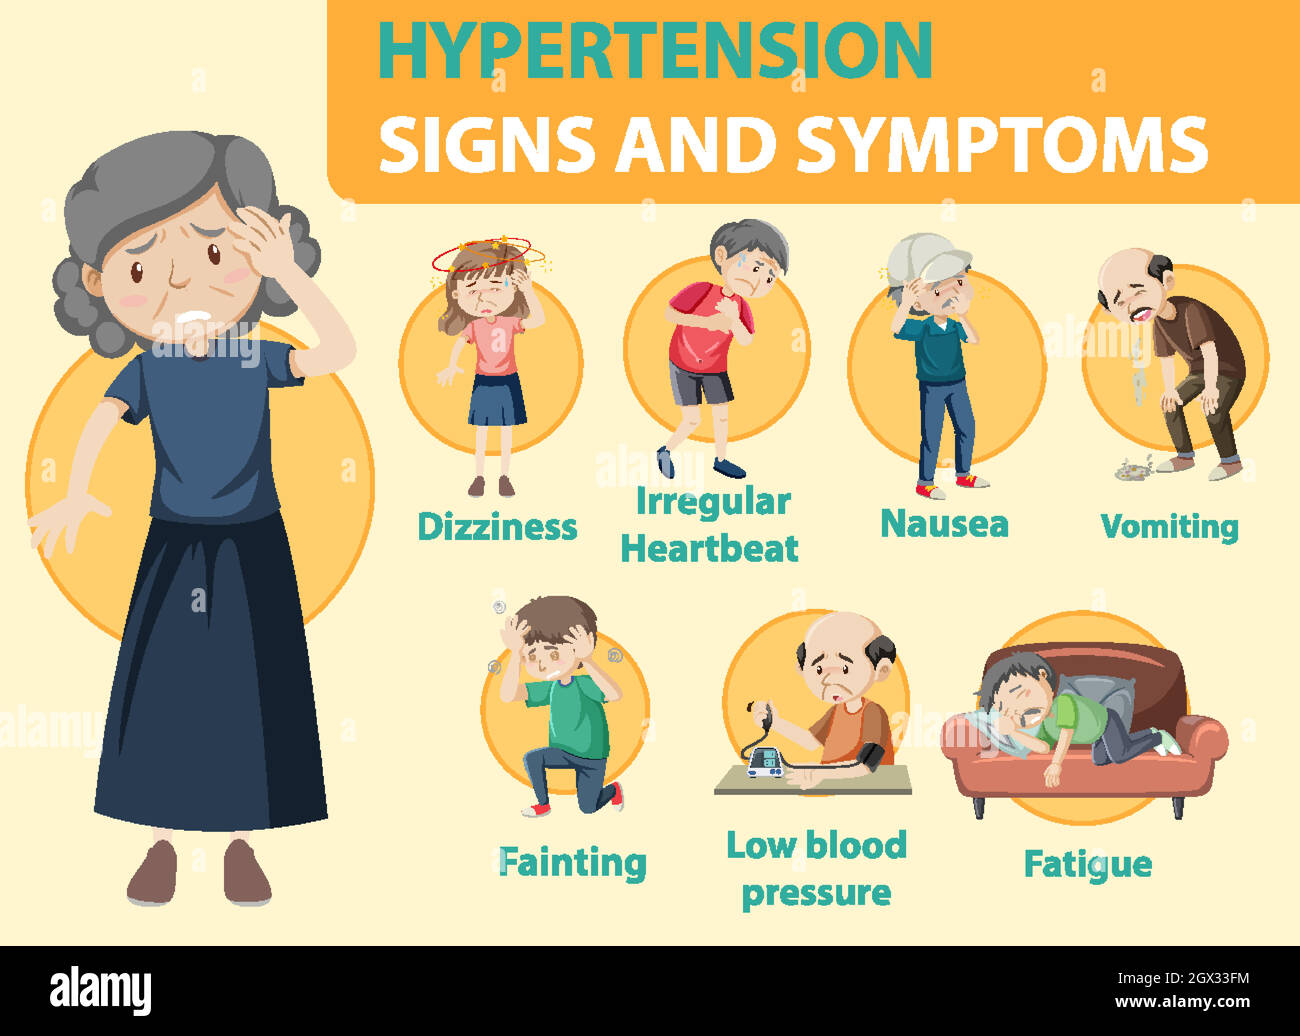 Hypertension sign and symptoms information infographic Stock Vector